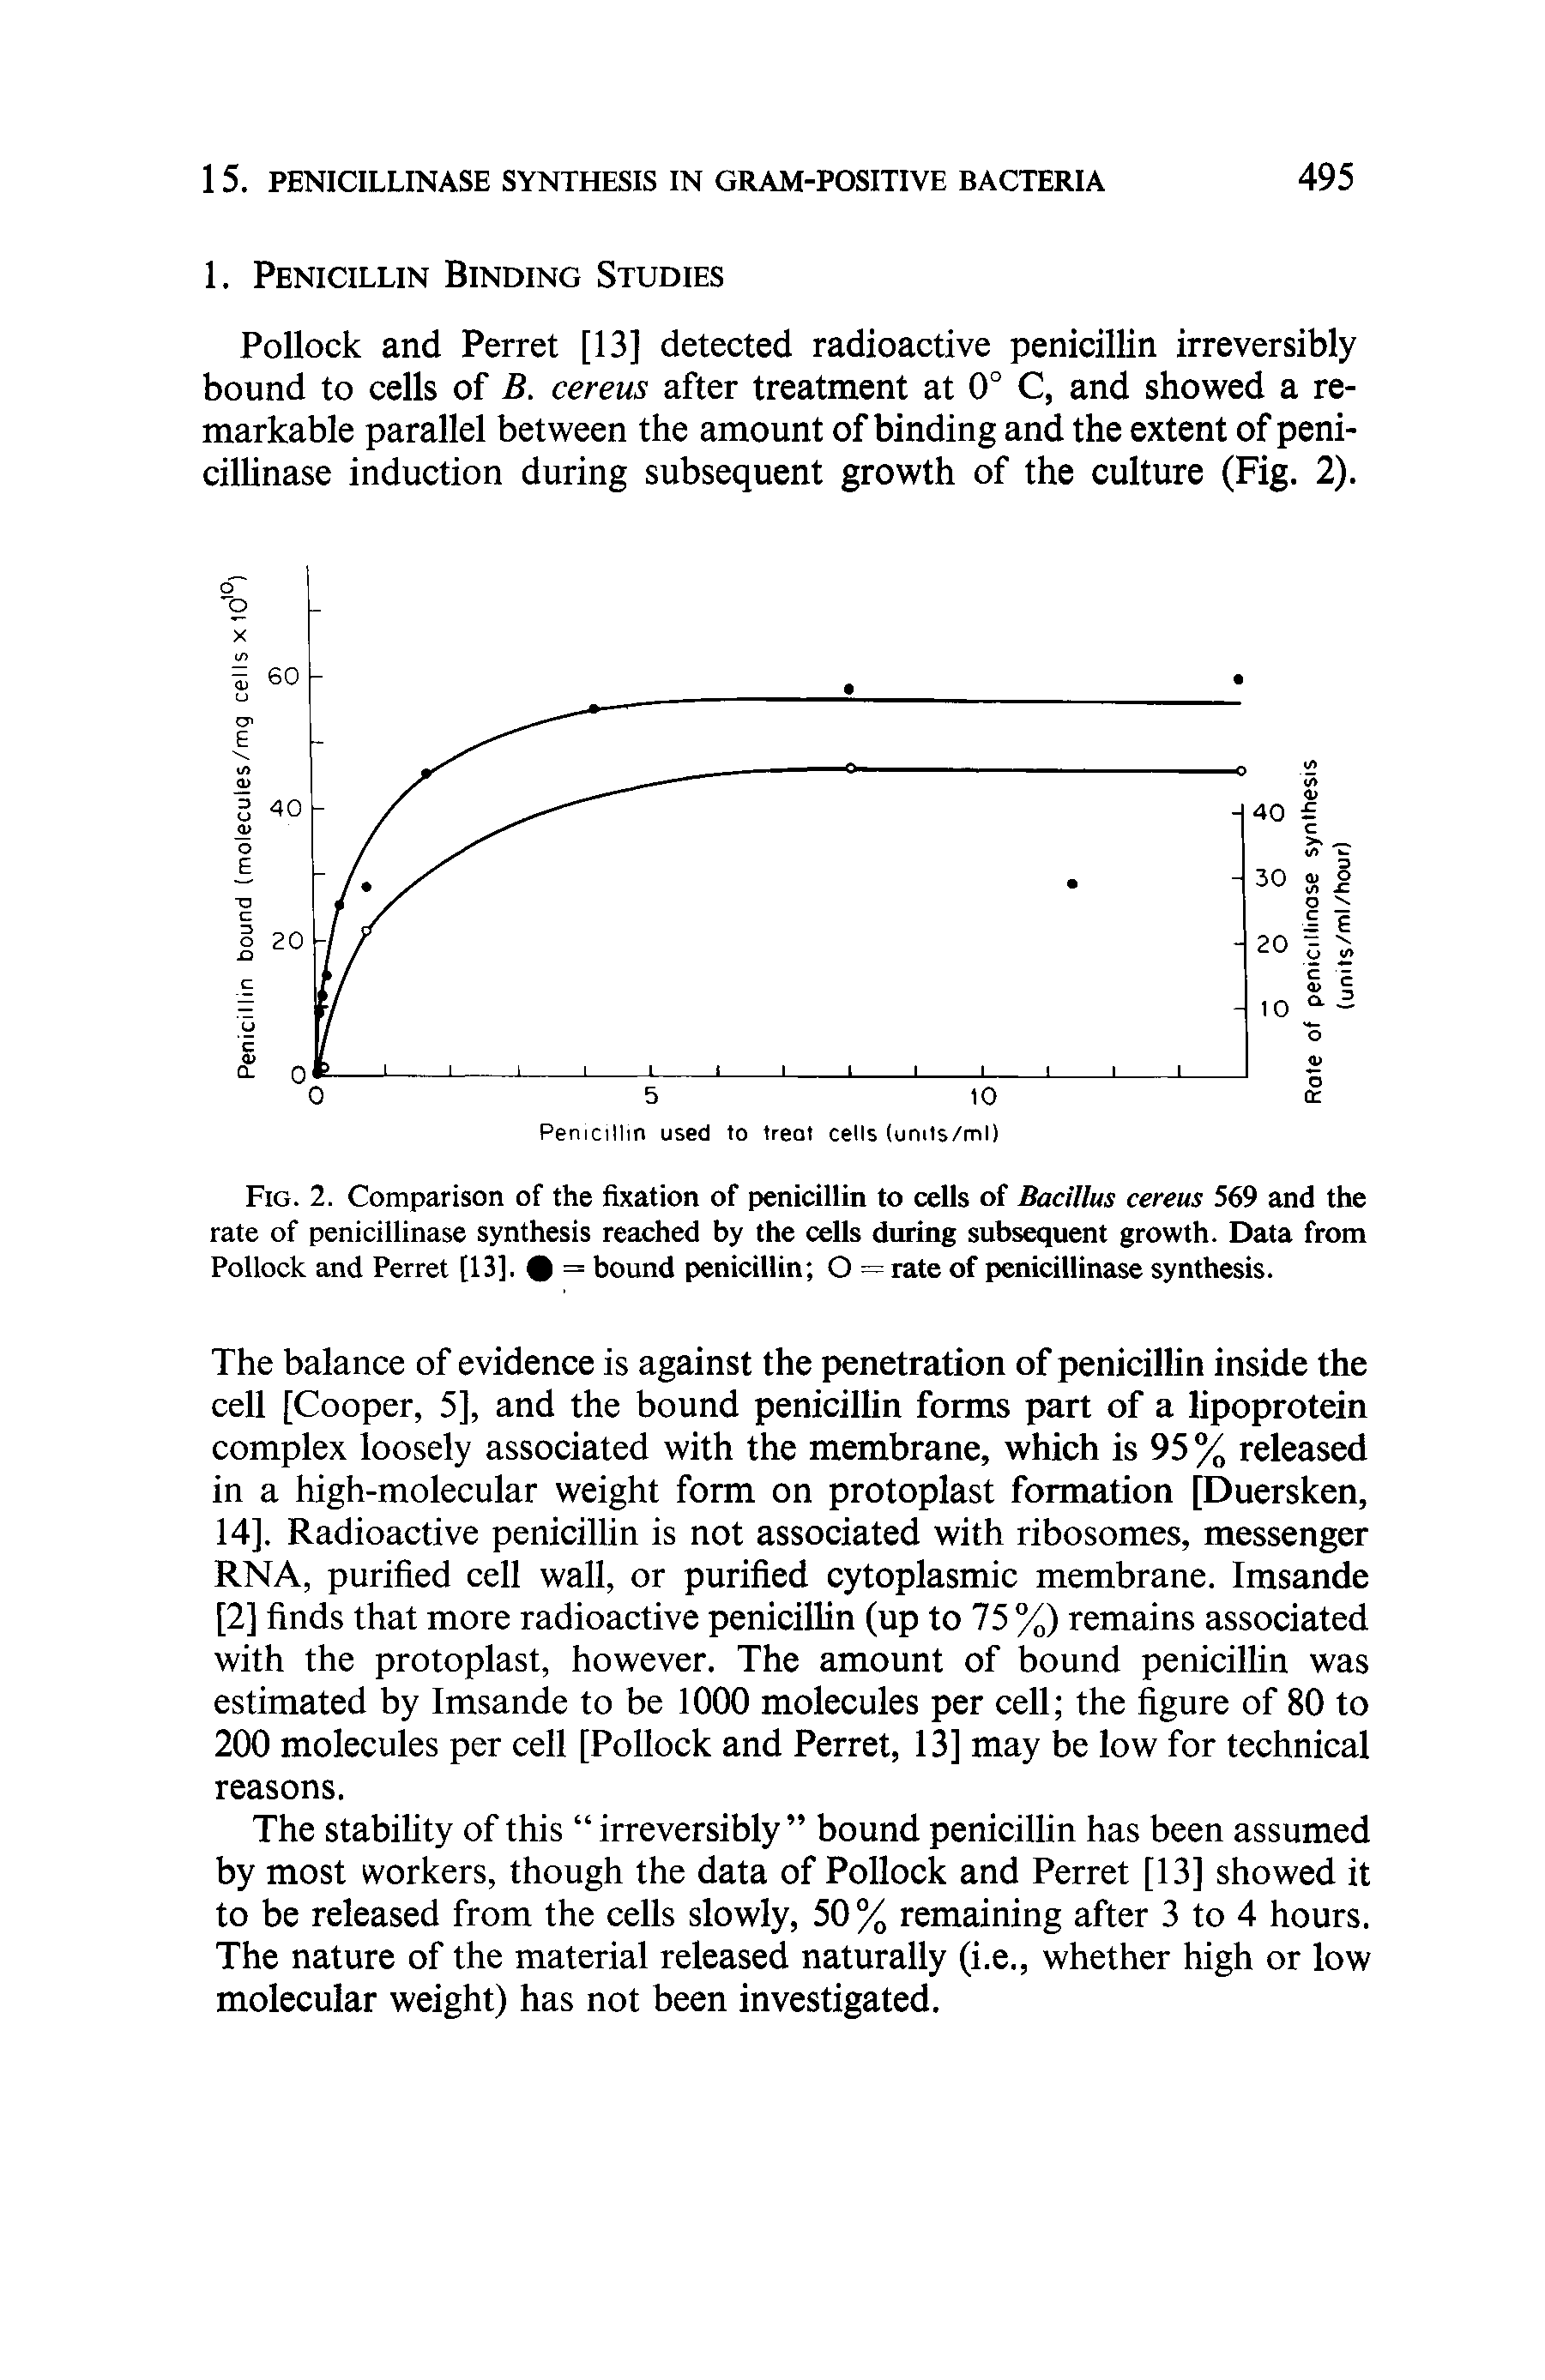 Fig. 2. Comparison of the fixation of penicillin to cells of Bacillus cereus 569 and the rate of penicillinase synthesis reached by the cells during subsequent growth. Data from Pollock and Perret [13]. = bound penicillin O = rate of penicillinase synthesis.